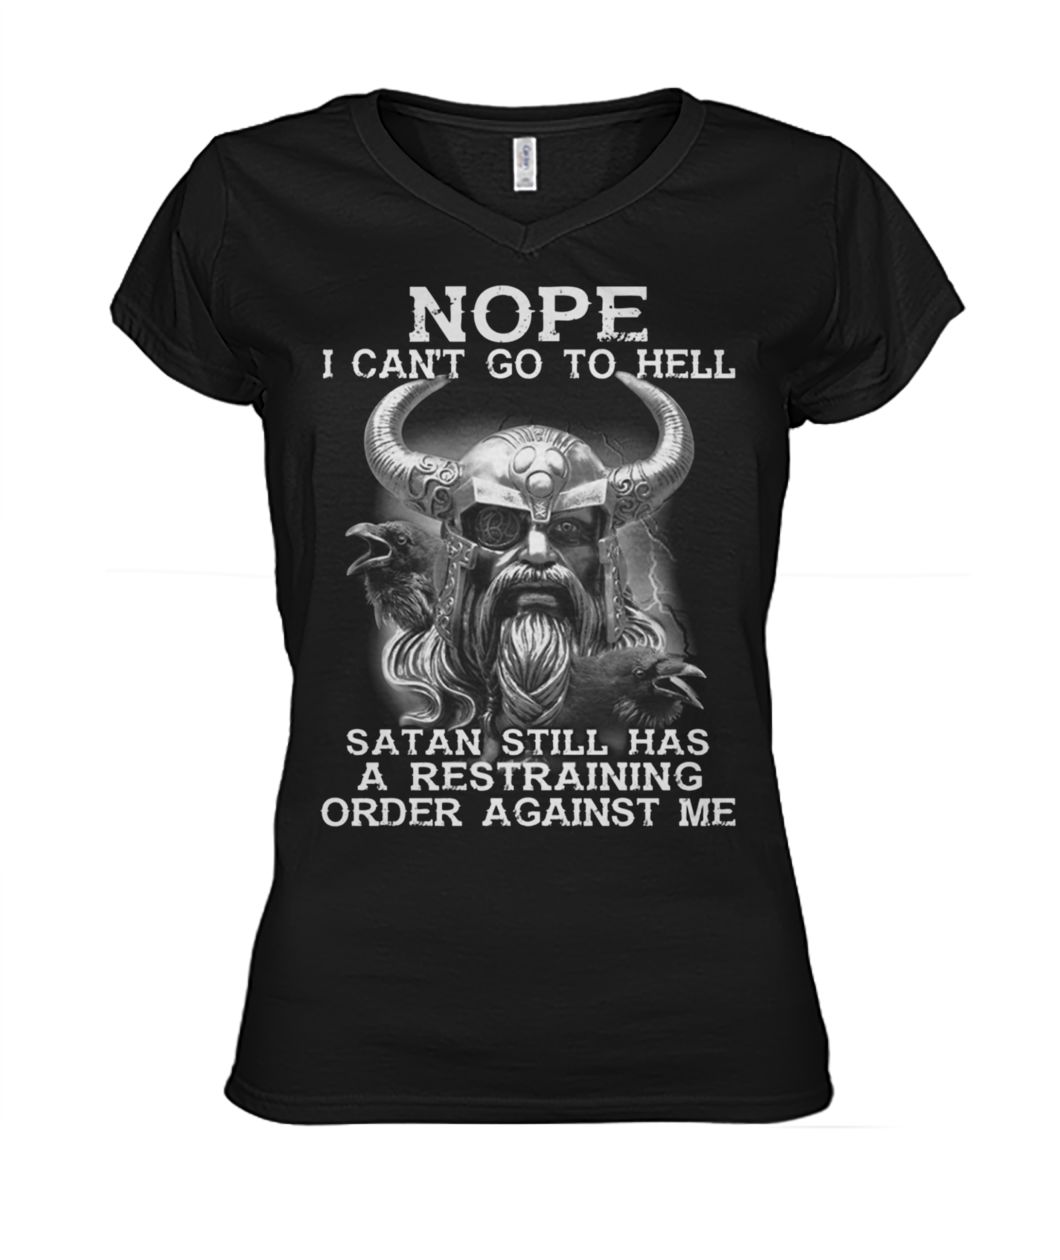 Viking nope I can't go to hell satan still has a restraining order against me women's v-neck